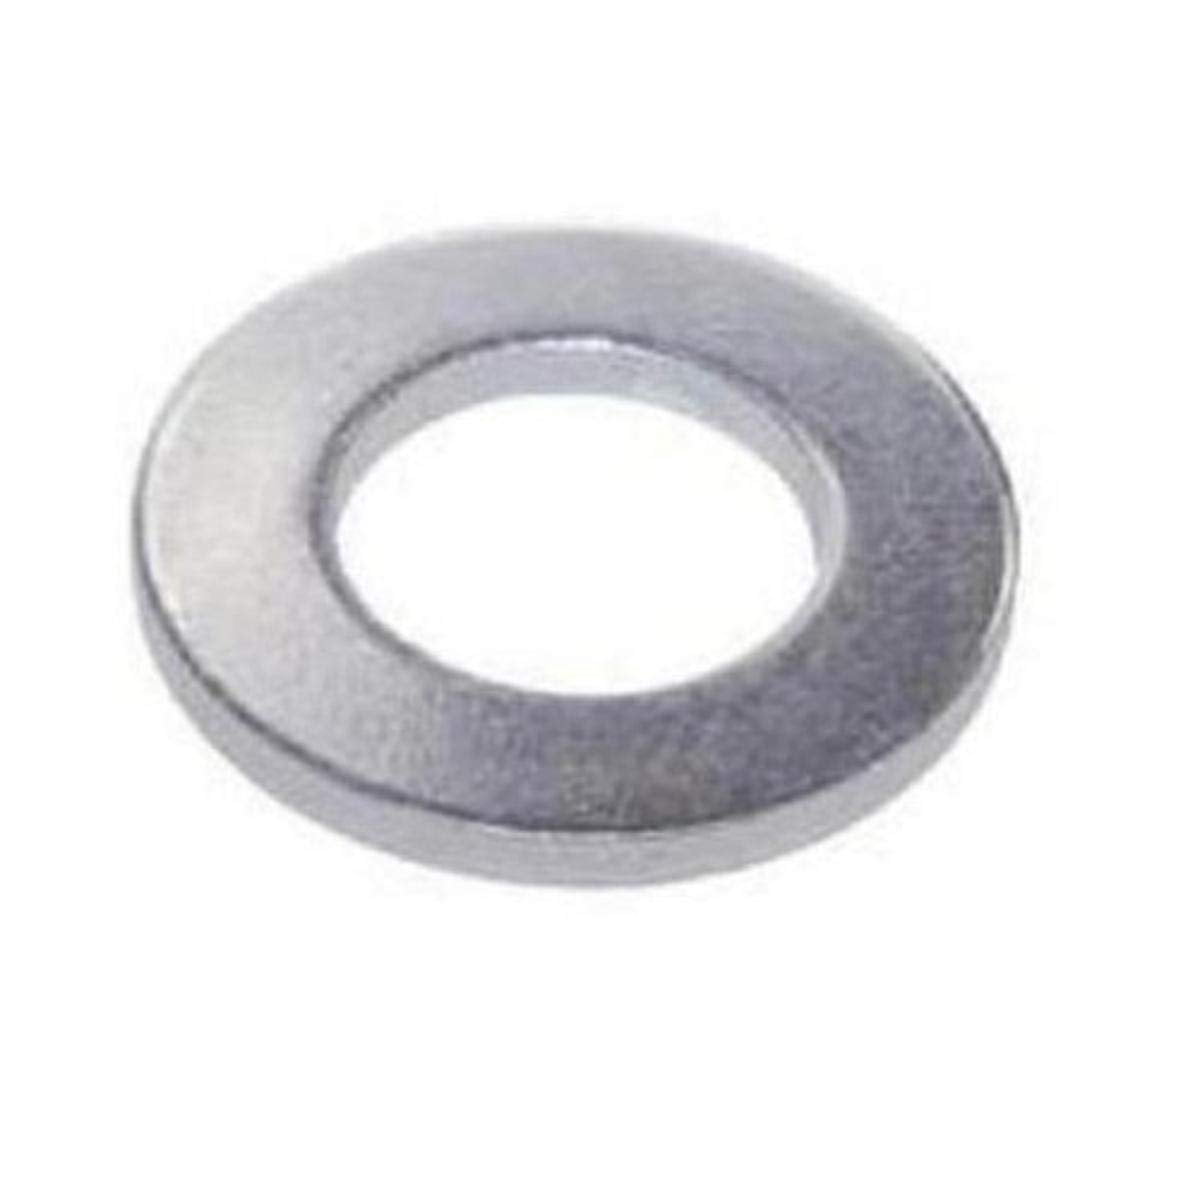 Plug Disk 3/8" id x 1-3/4"od x 3/8" high,Stainless S. Washer,Spacer Stand Off 